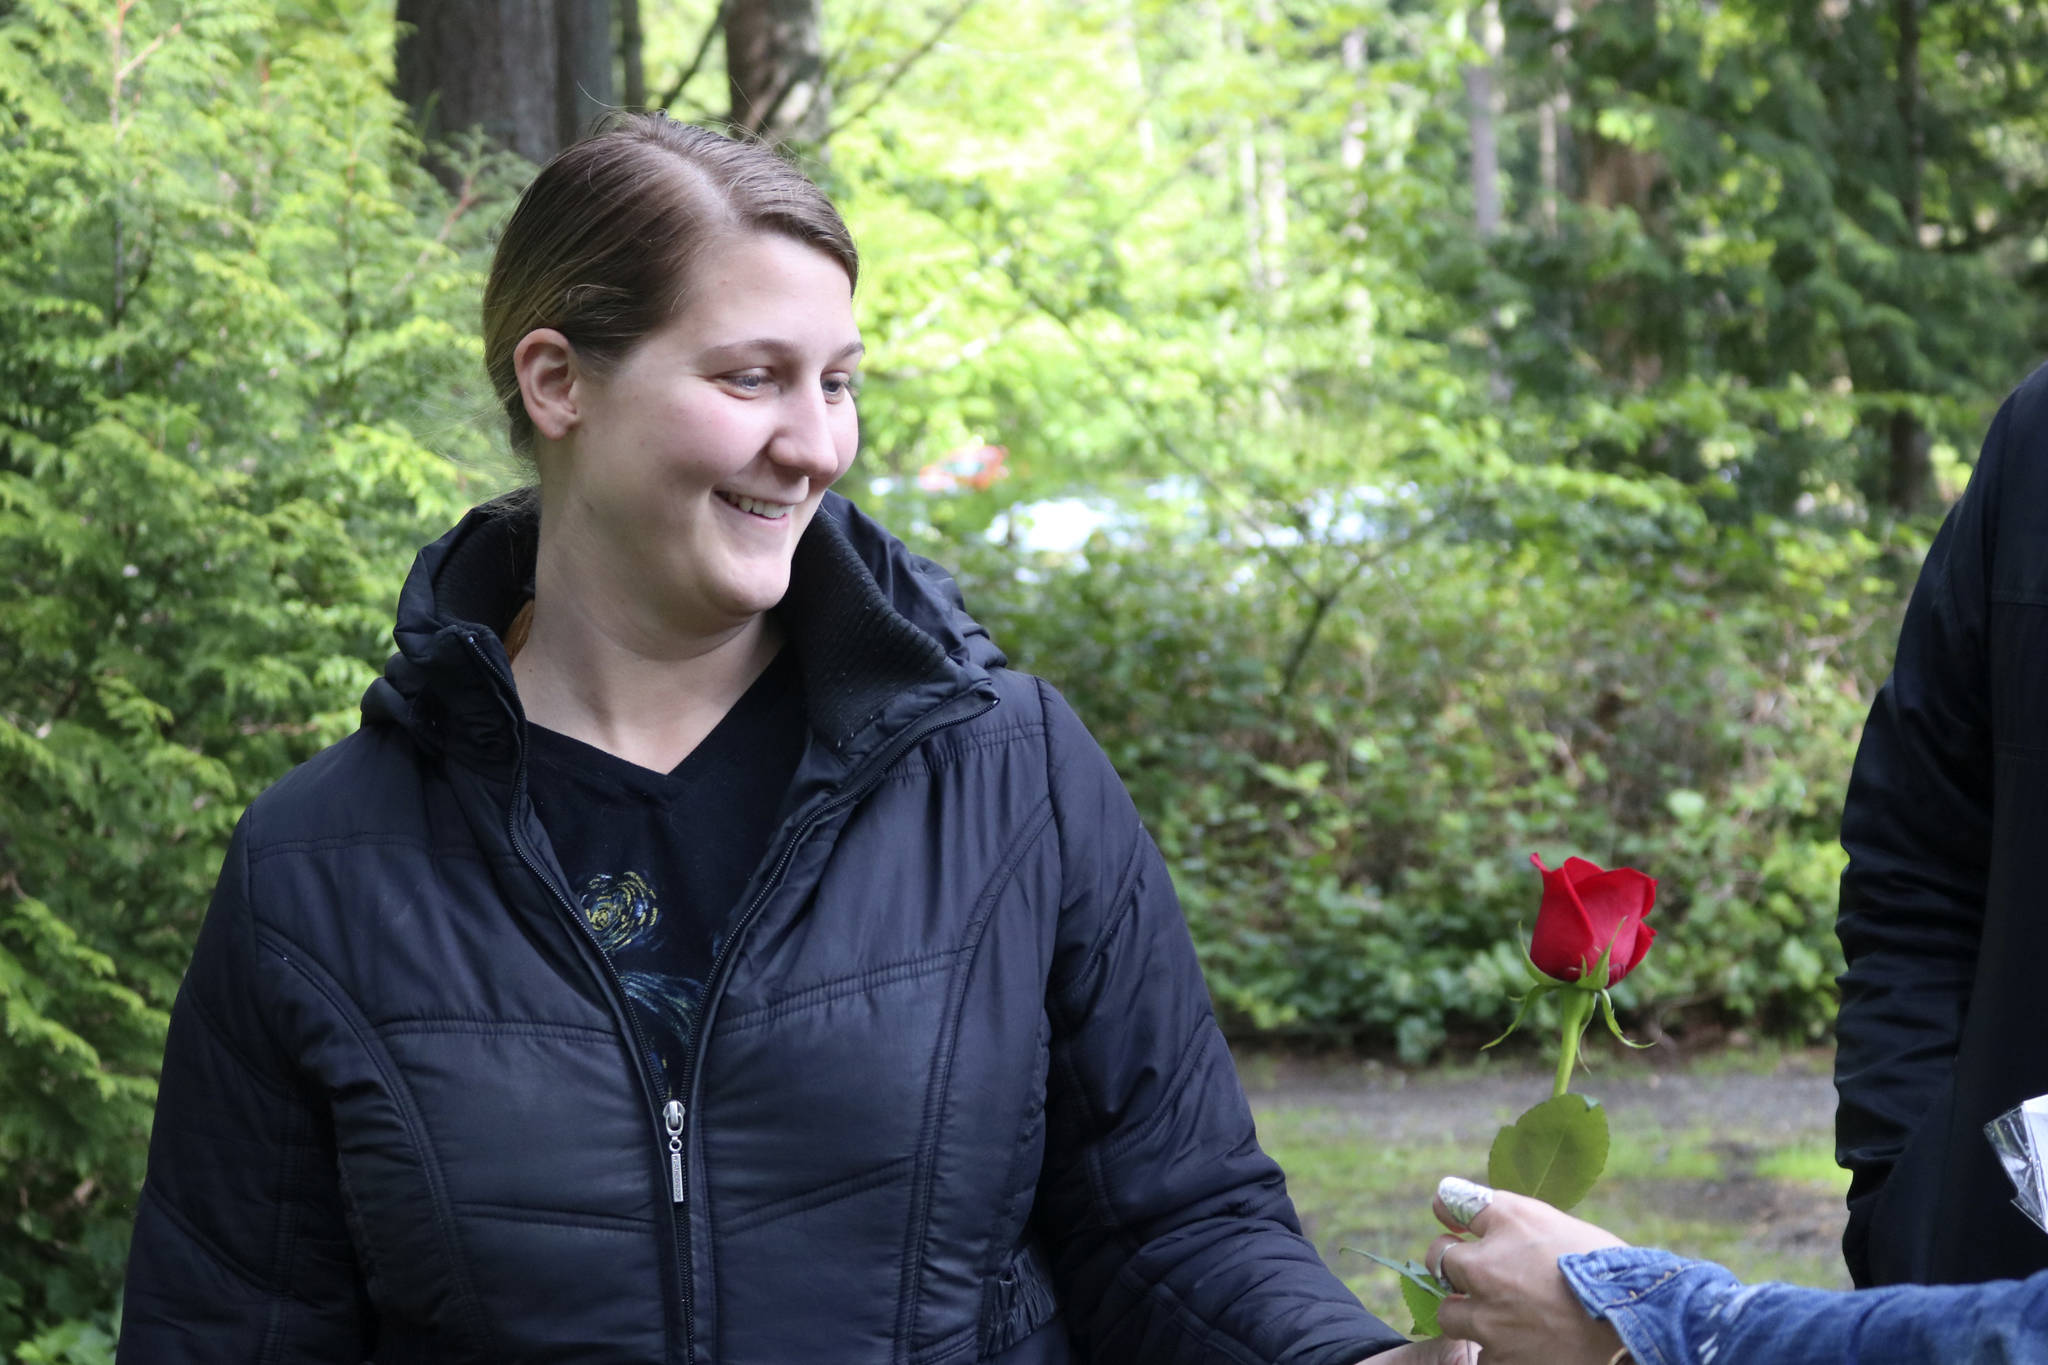 Sammamish woman aims to hand out roses to strangers every day for a year